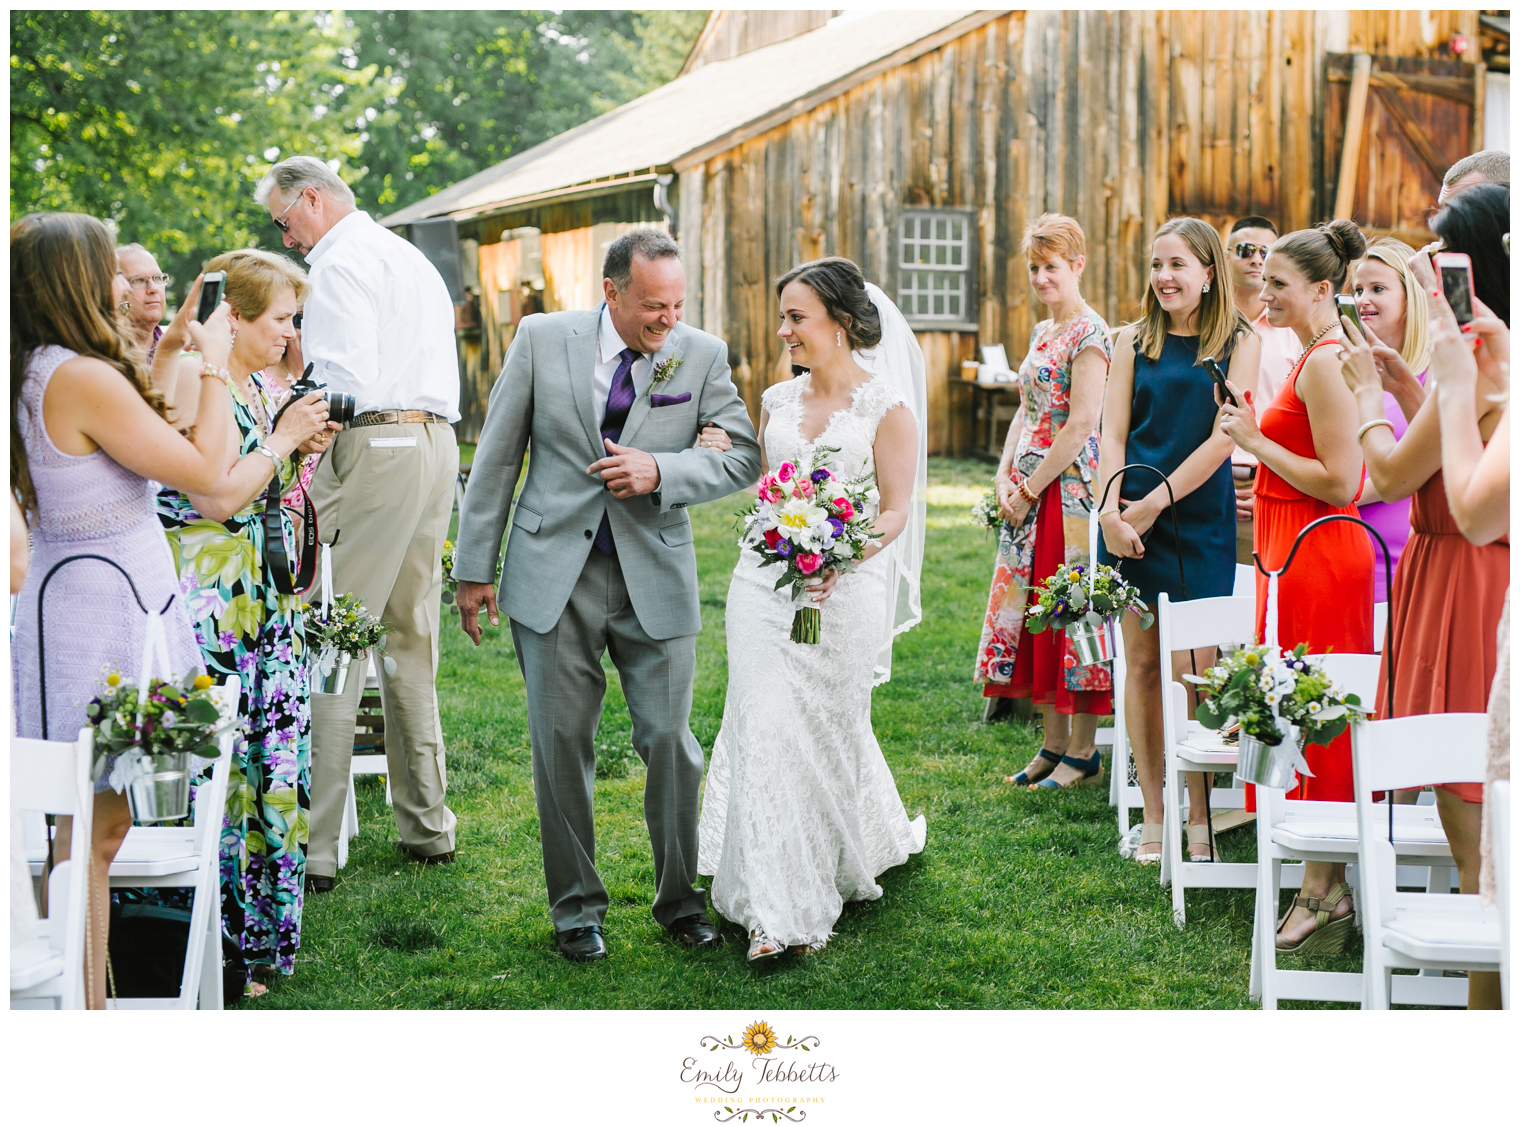 Emily Tebbetts Photography - webb barn wedding wethersfield ct connecticut rustic chic wedding first look fathers day emotional -4.jpg